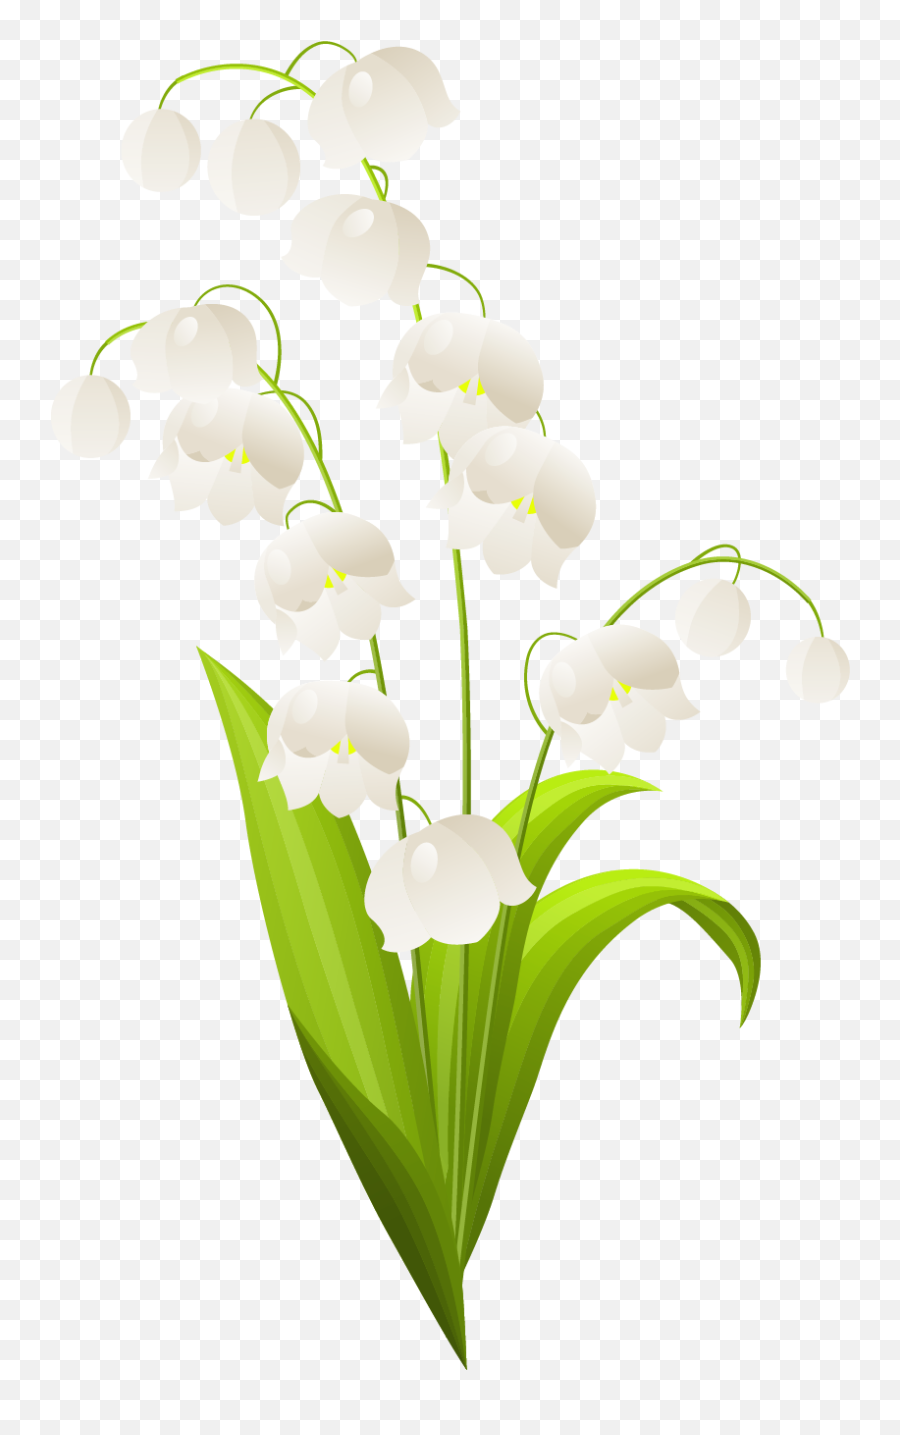 Lily Of The Valley Png Transparent - Lily Of The Valley Png,Lily Transparent Background